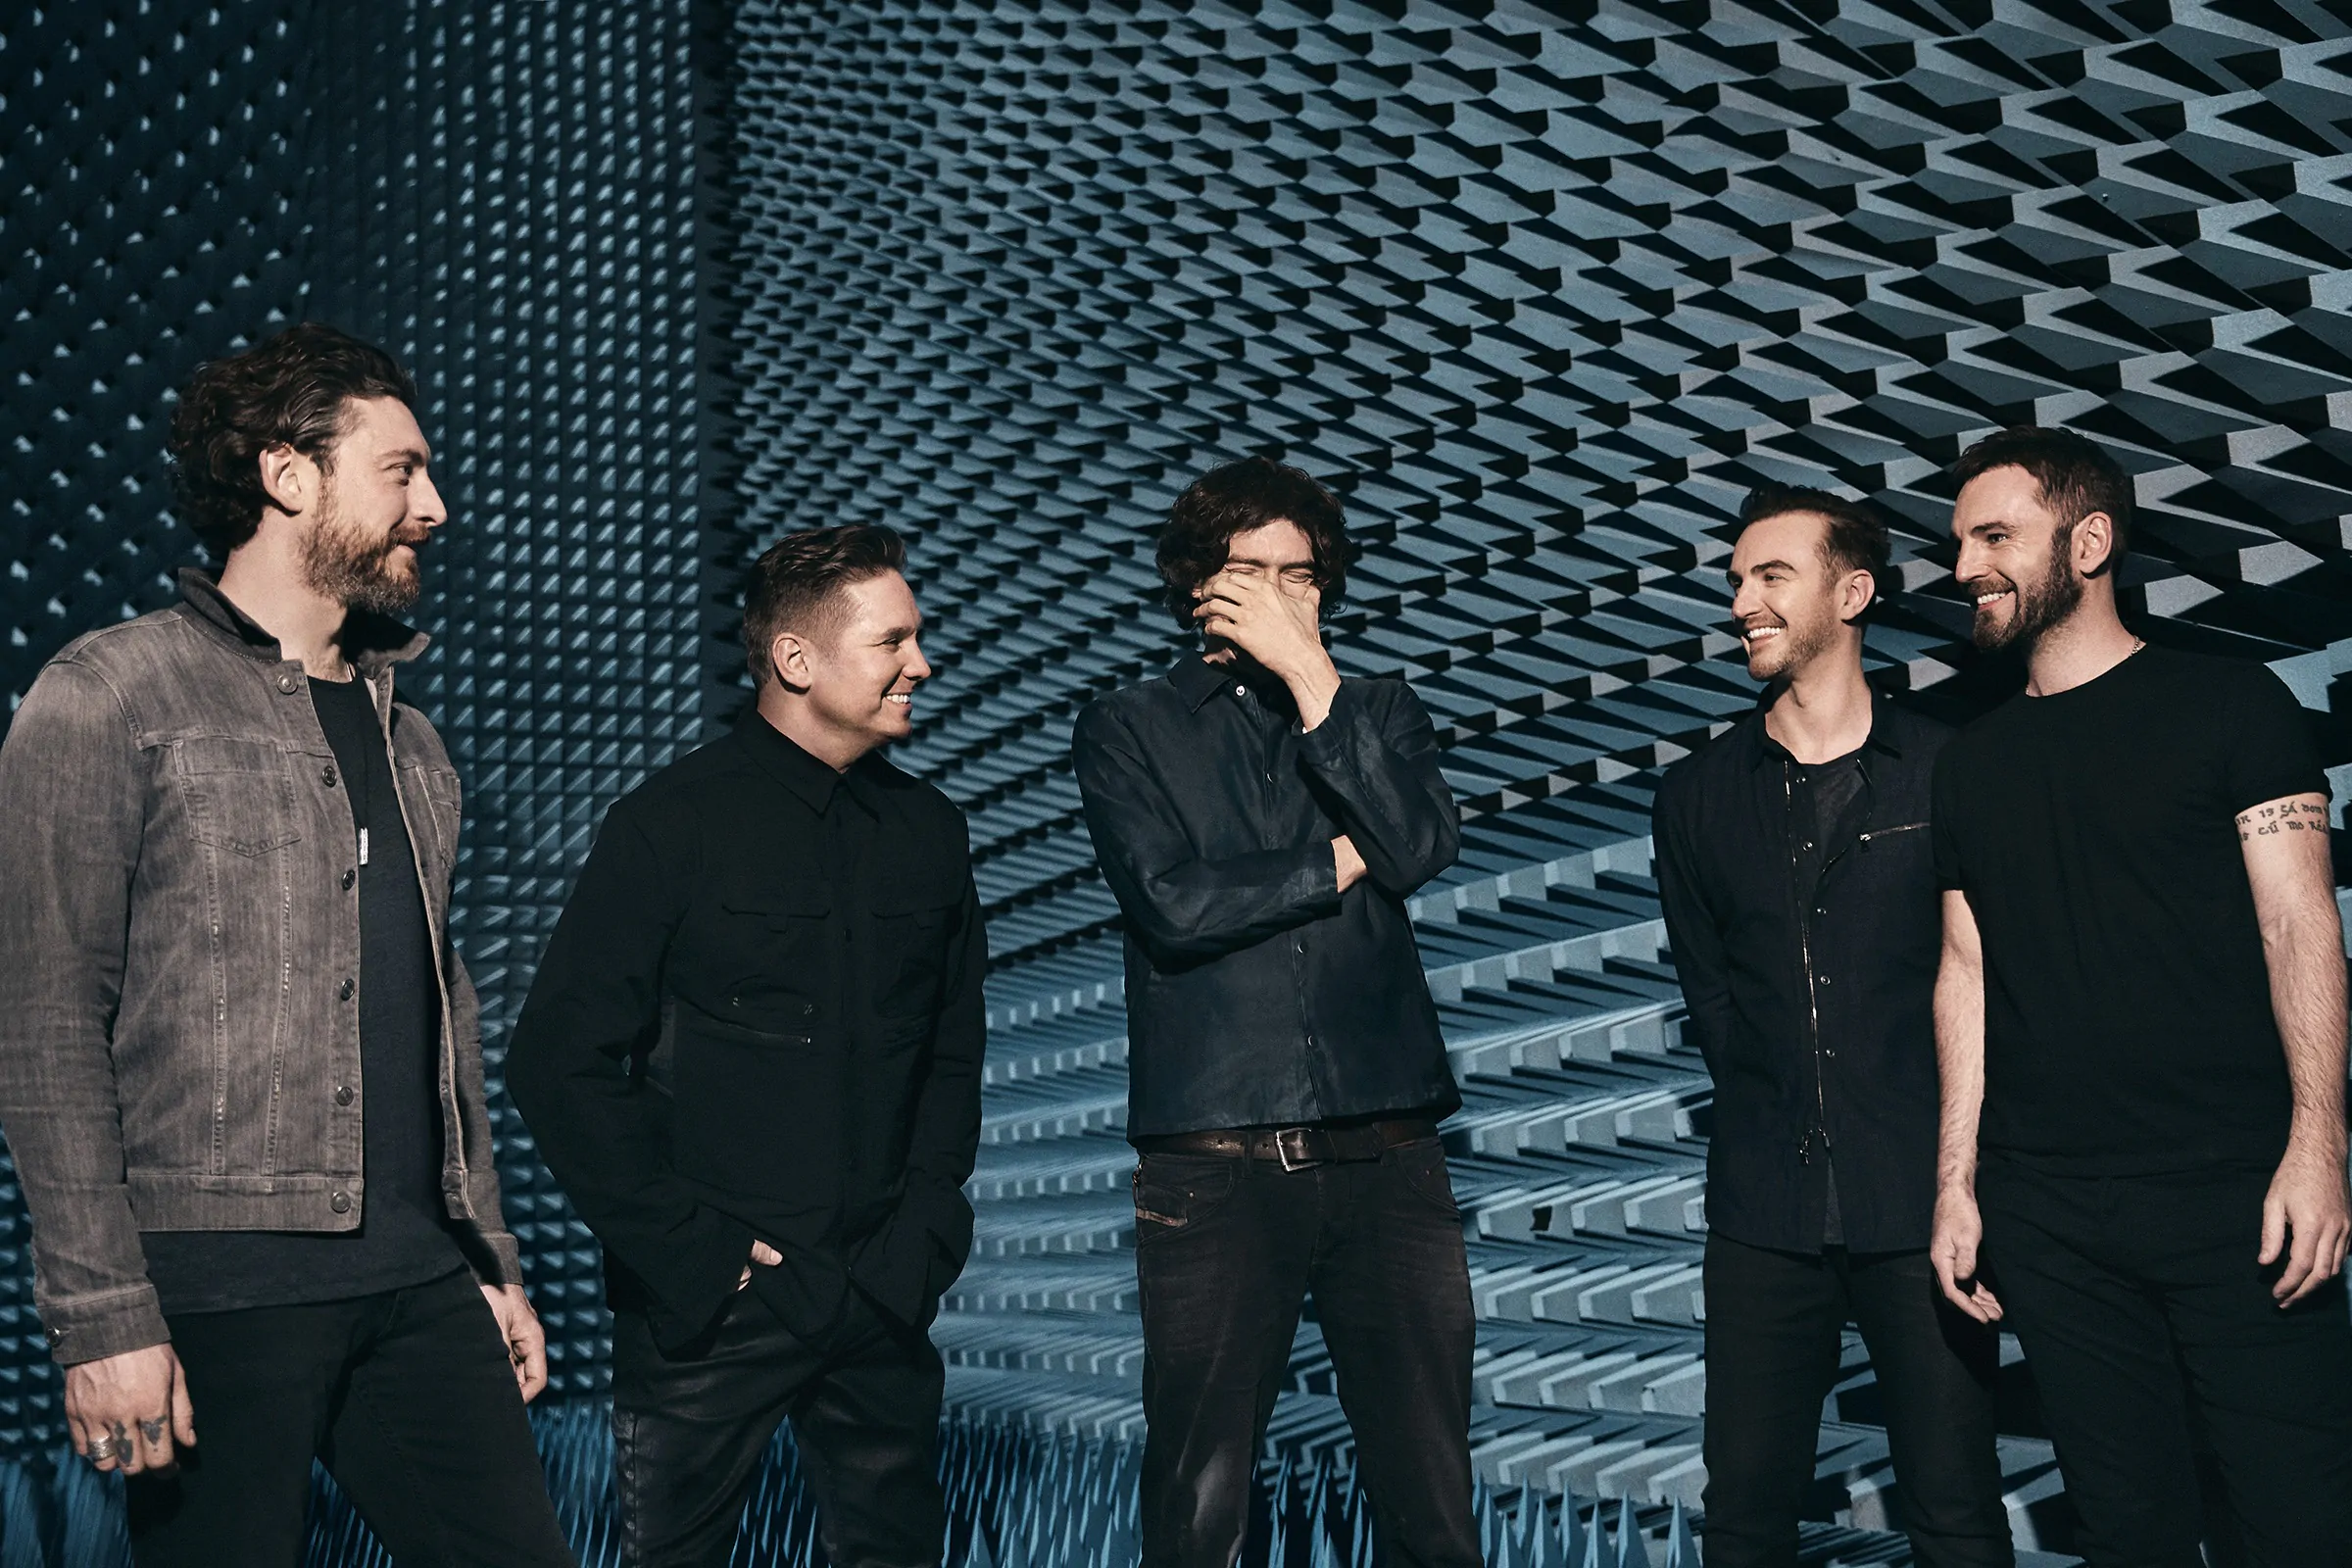 SNOW PATROL and the SATURDAY SONGWRITERS release The Fireside Sessions EP on August 21st